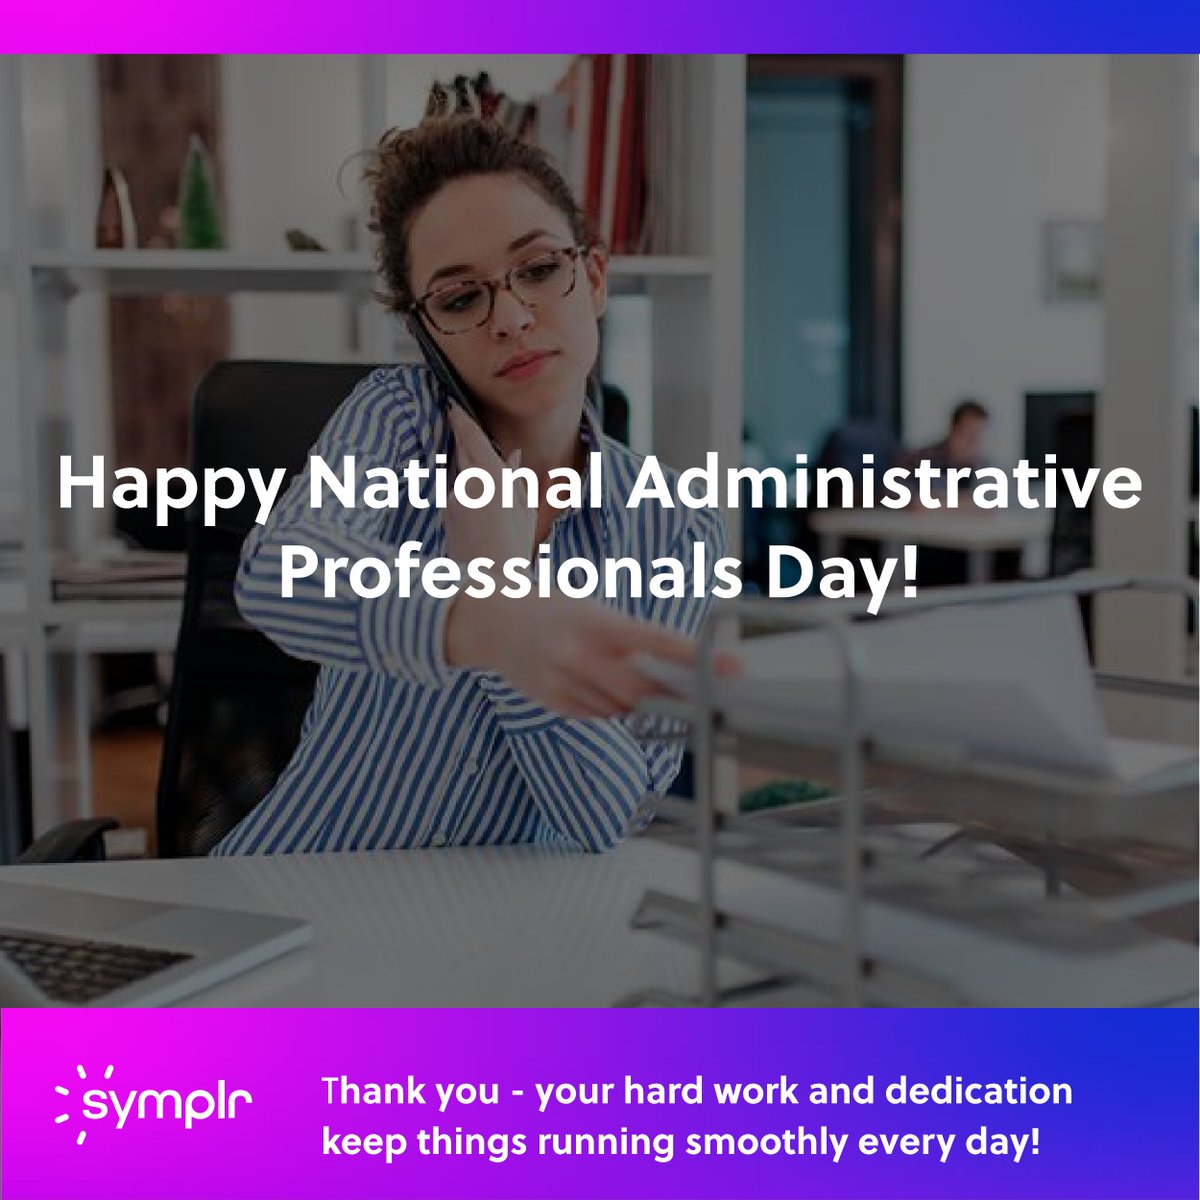 Happy #AdminProfessionalsDay! We recogniz all the amazing professional and administrative assistants out there – you're the backbone of our success. Thank you for all your hard work and dedication! 🙌✨ #AdministrativeProfessionalsDay #ThankYou